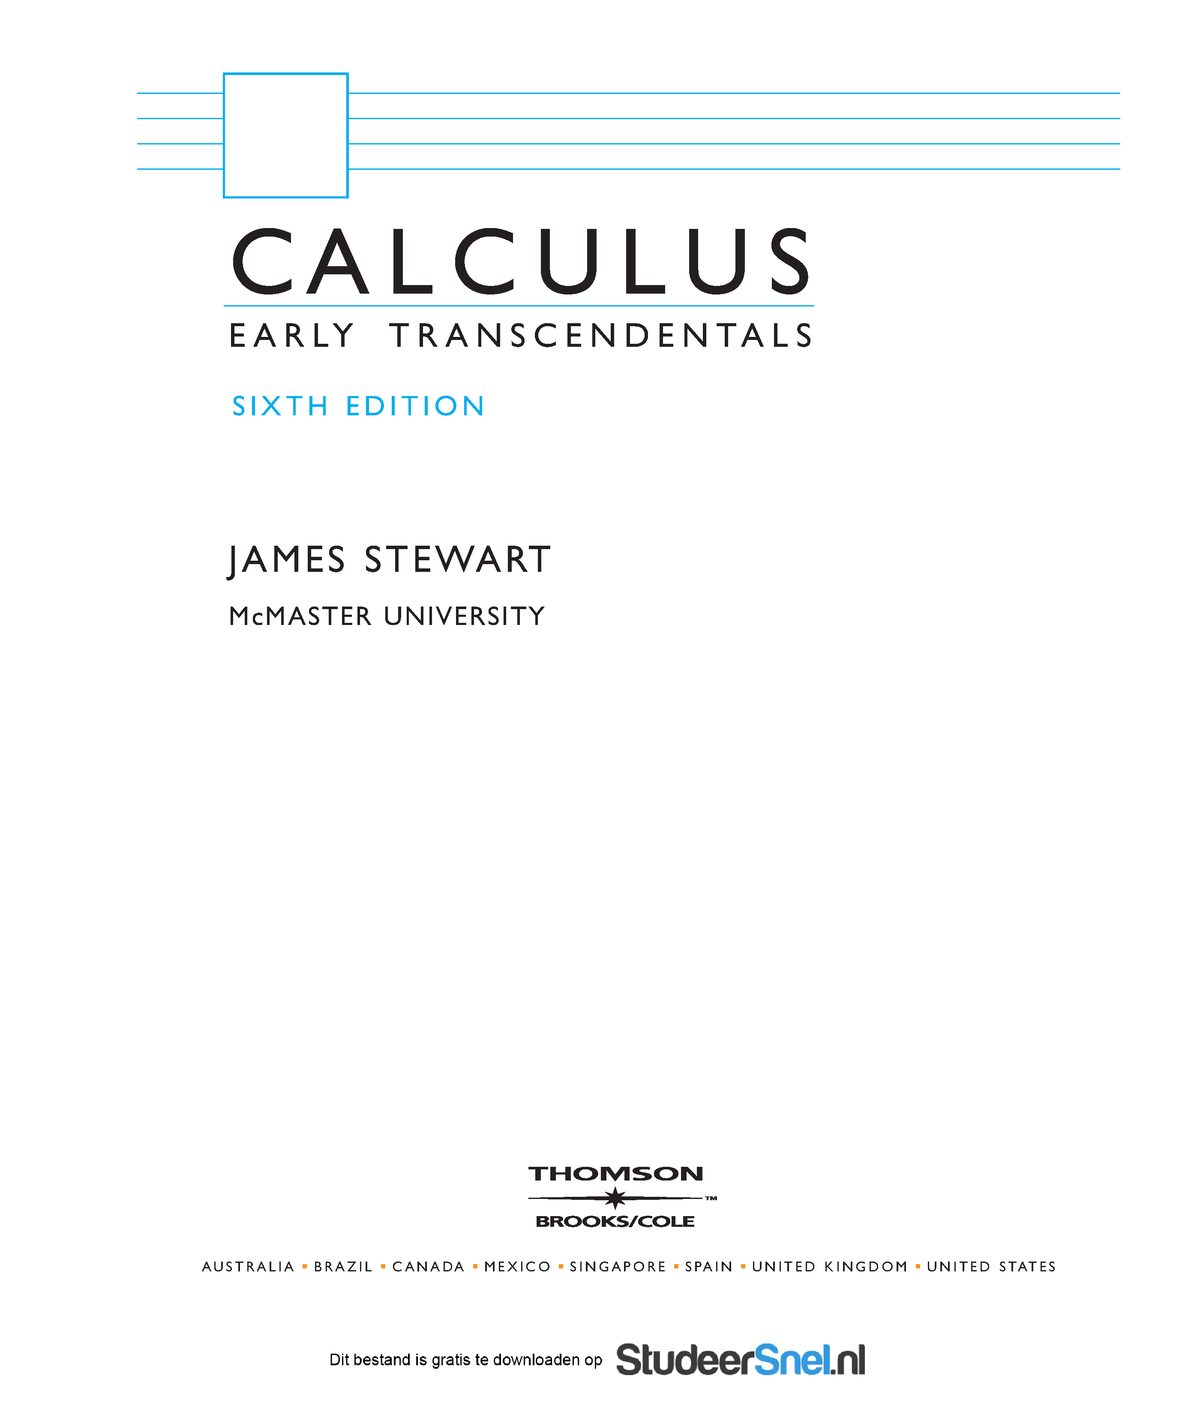 calculus early transcendentals 8th edition pdf anton